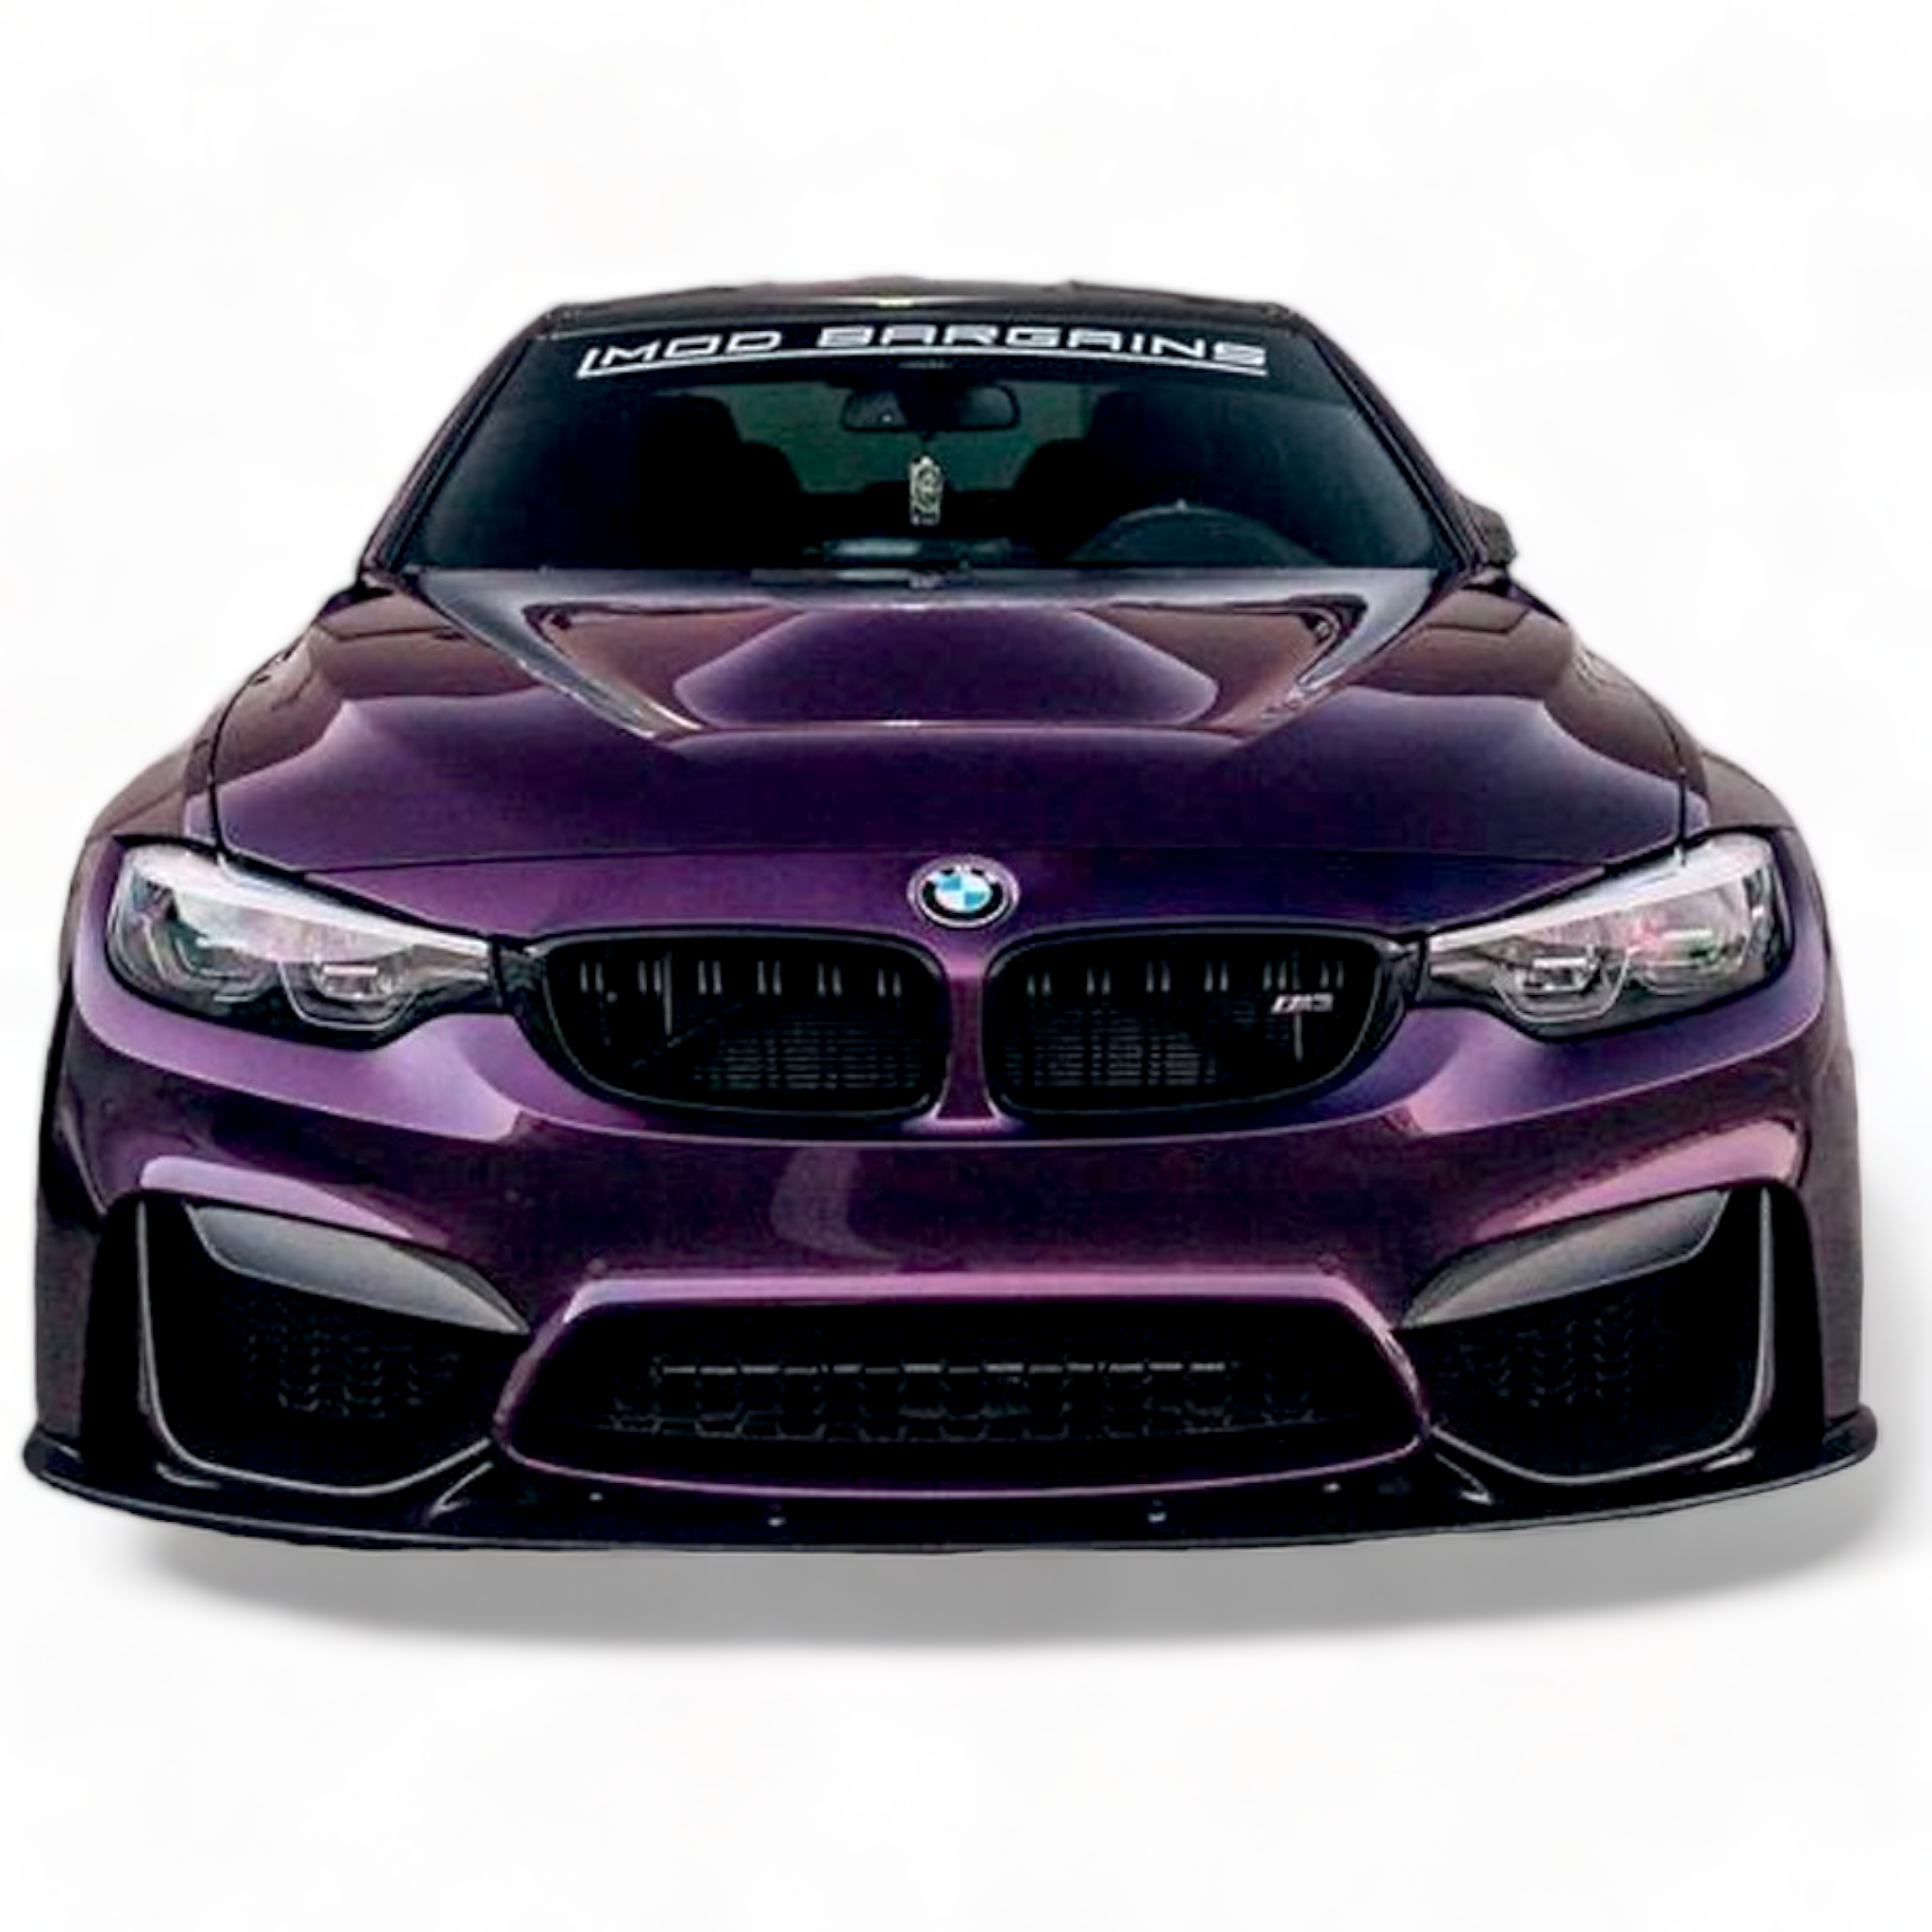 Hood Bonnet suitable for BMW 3 Series F30 F31 F35 (2011-2019) 4 Series F32  F33 F36 Gran Coupe (2011-2019) M3 M4 GTS Look 